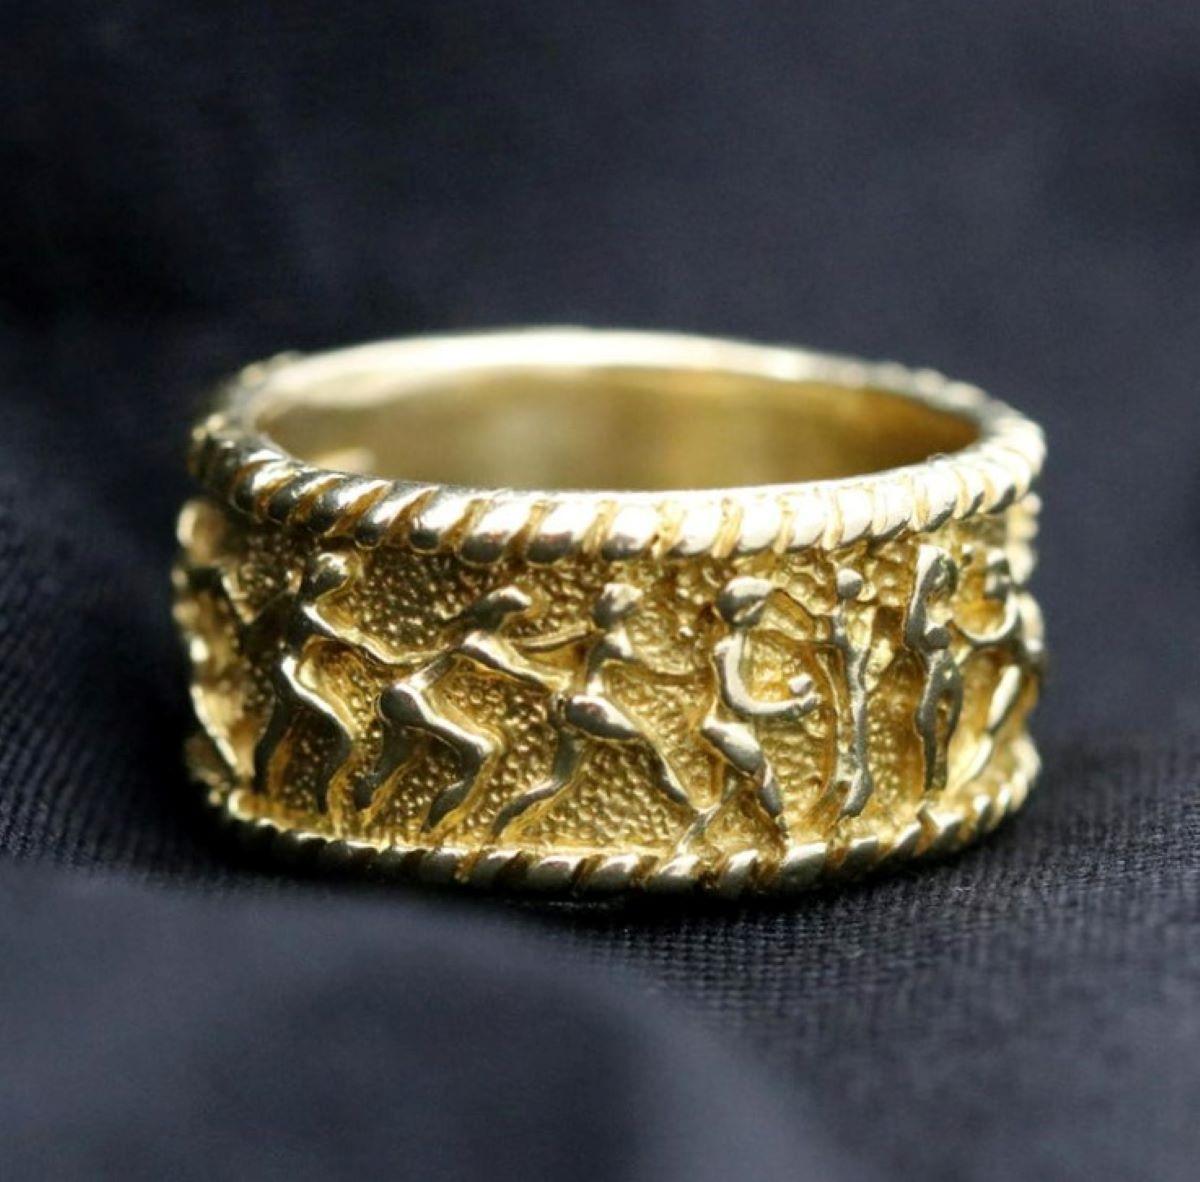 An 18 karat yellow gold band with a mill grained edge, depicting a scene of Adam and Eve in the garden of Eden. The texture and relief add depth to this handsome ring. Designed by Renato Cipullo, it measures 7/16 inches wide, and is a size 11 3/4.